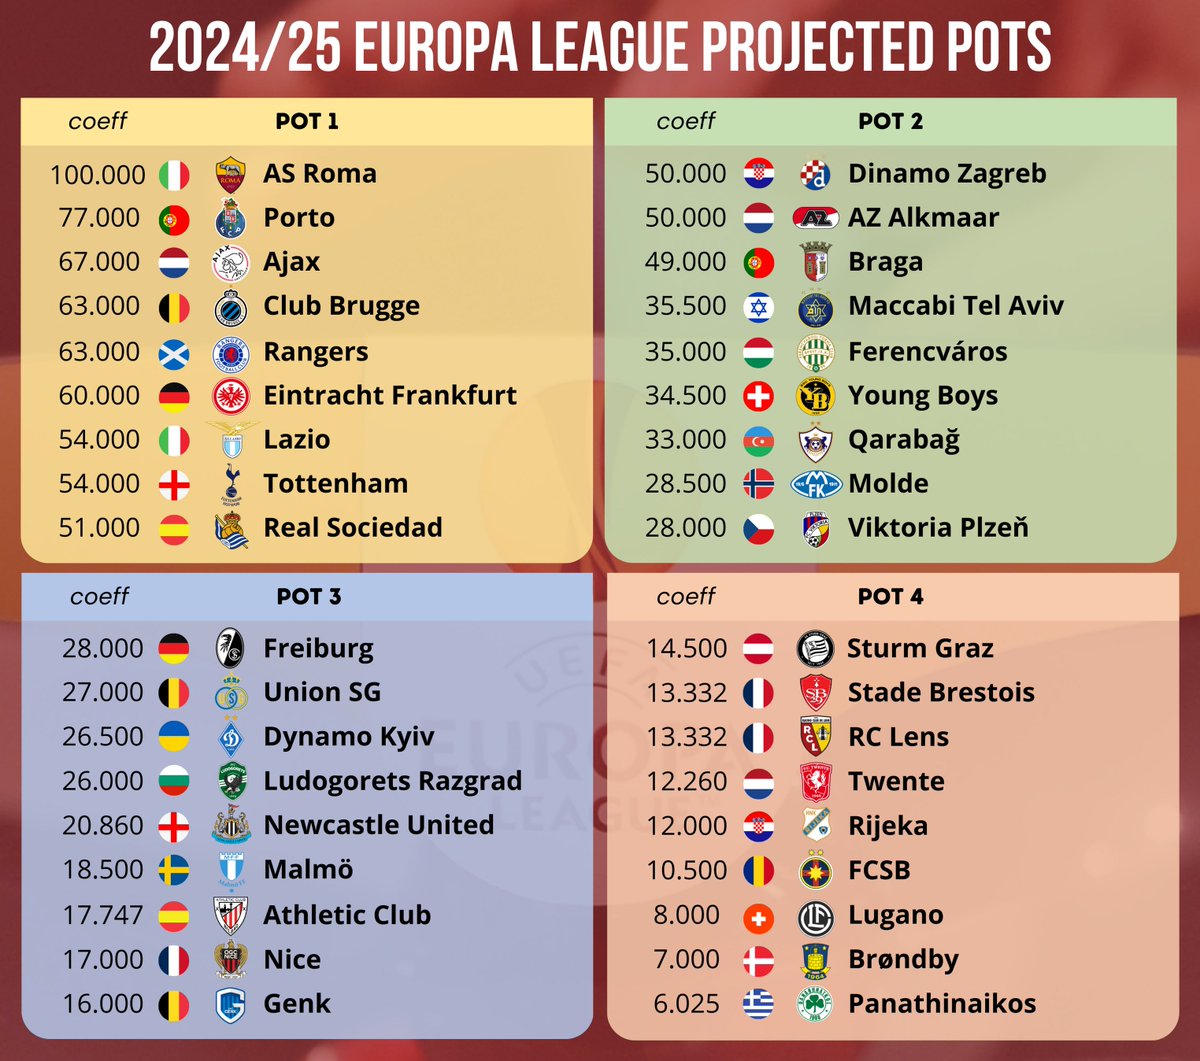 Europa League - Projected pots.

🏴󠁧󠁢󠁥󠁮󠁧󠁿 OUT - Manchester United
🏴󠁧󠁢󠁥󠁮󠁧󠁿 IN - Newcastle United

🇮🇹 OUT - Atalanta ⬆️
🇮🇹 IN - AS Roma

🇮🇹 OUT - Napoli
🇮🇹 IN - Lazio

🇹🇷 OUT - Fenerbahçe ⬆️
🇫🇷 IN - Stade Brestois

🇩🇰 OUT - Midtjylland
🇩🇰 IN - Brøndby